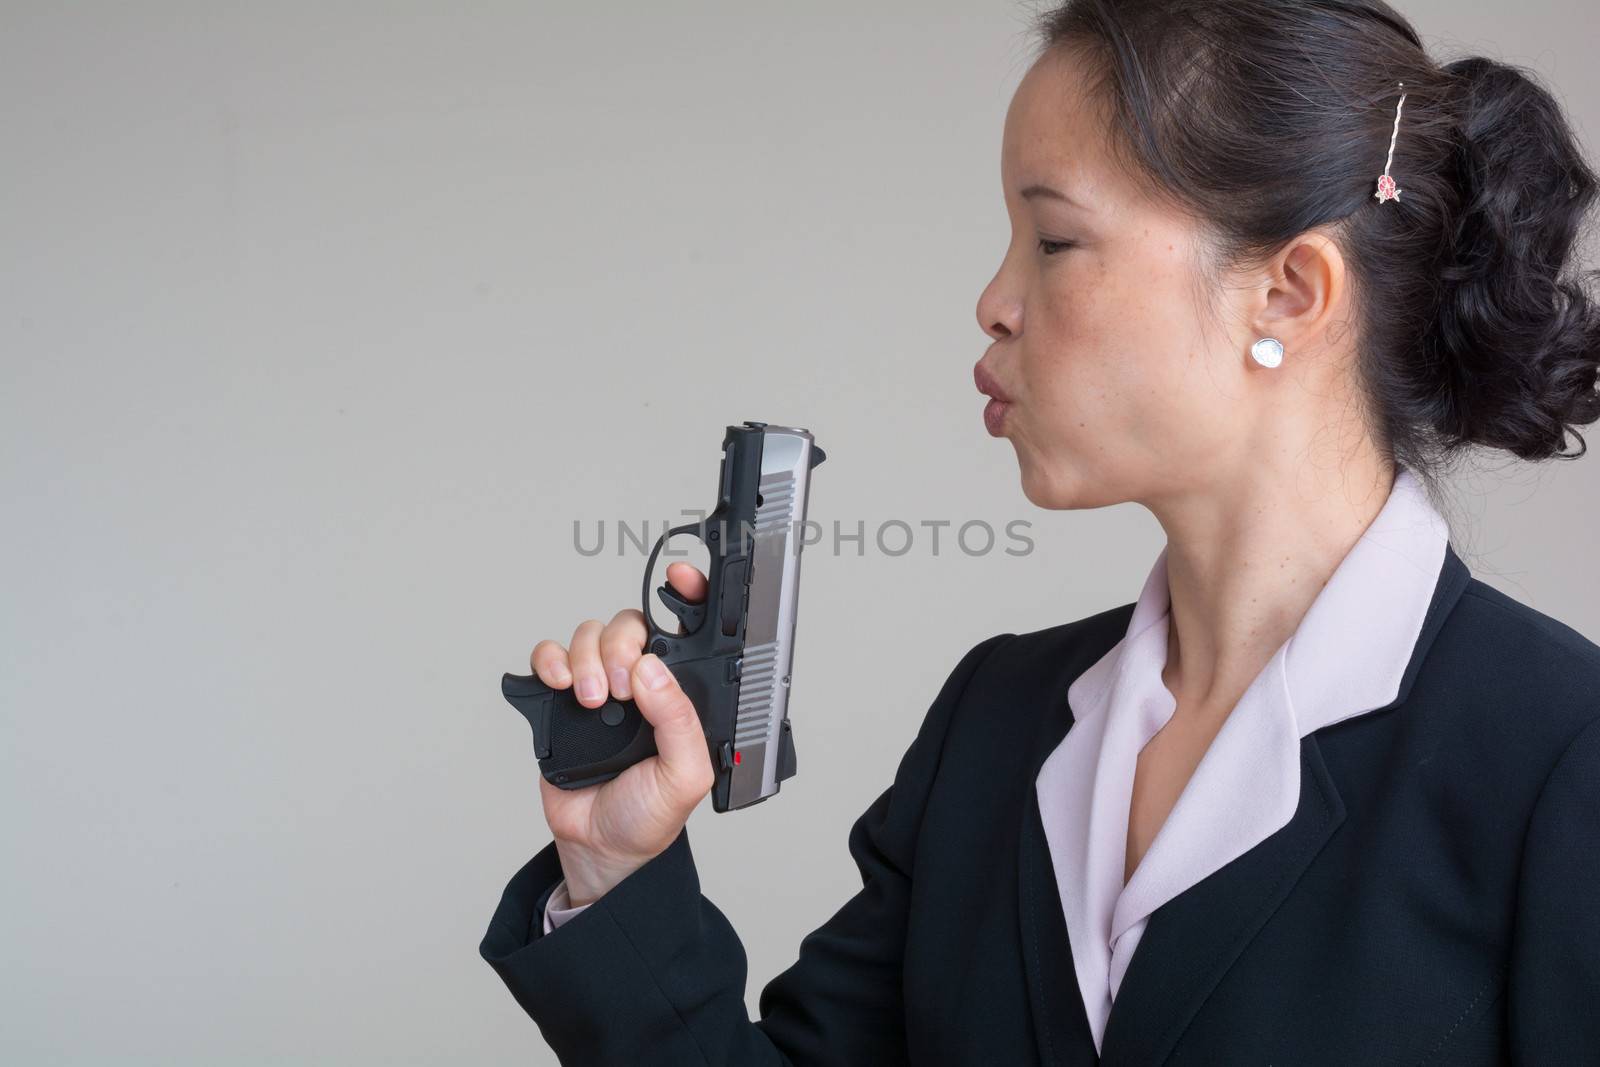 Woman in business suit blowing smoke off a fired hand gun on grey background